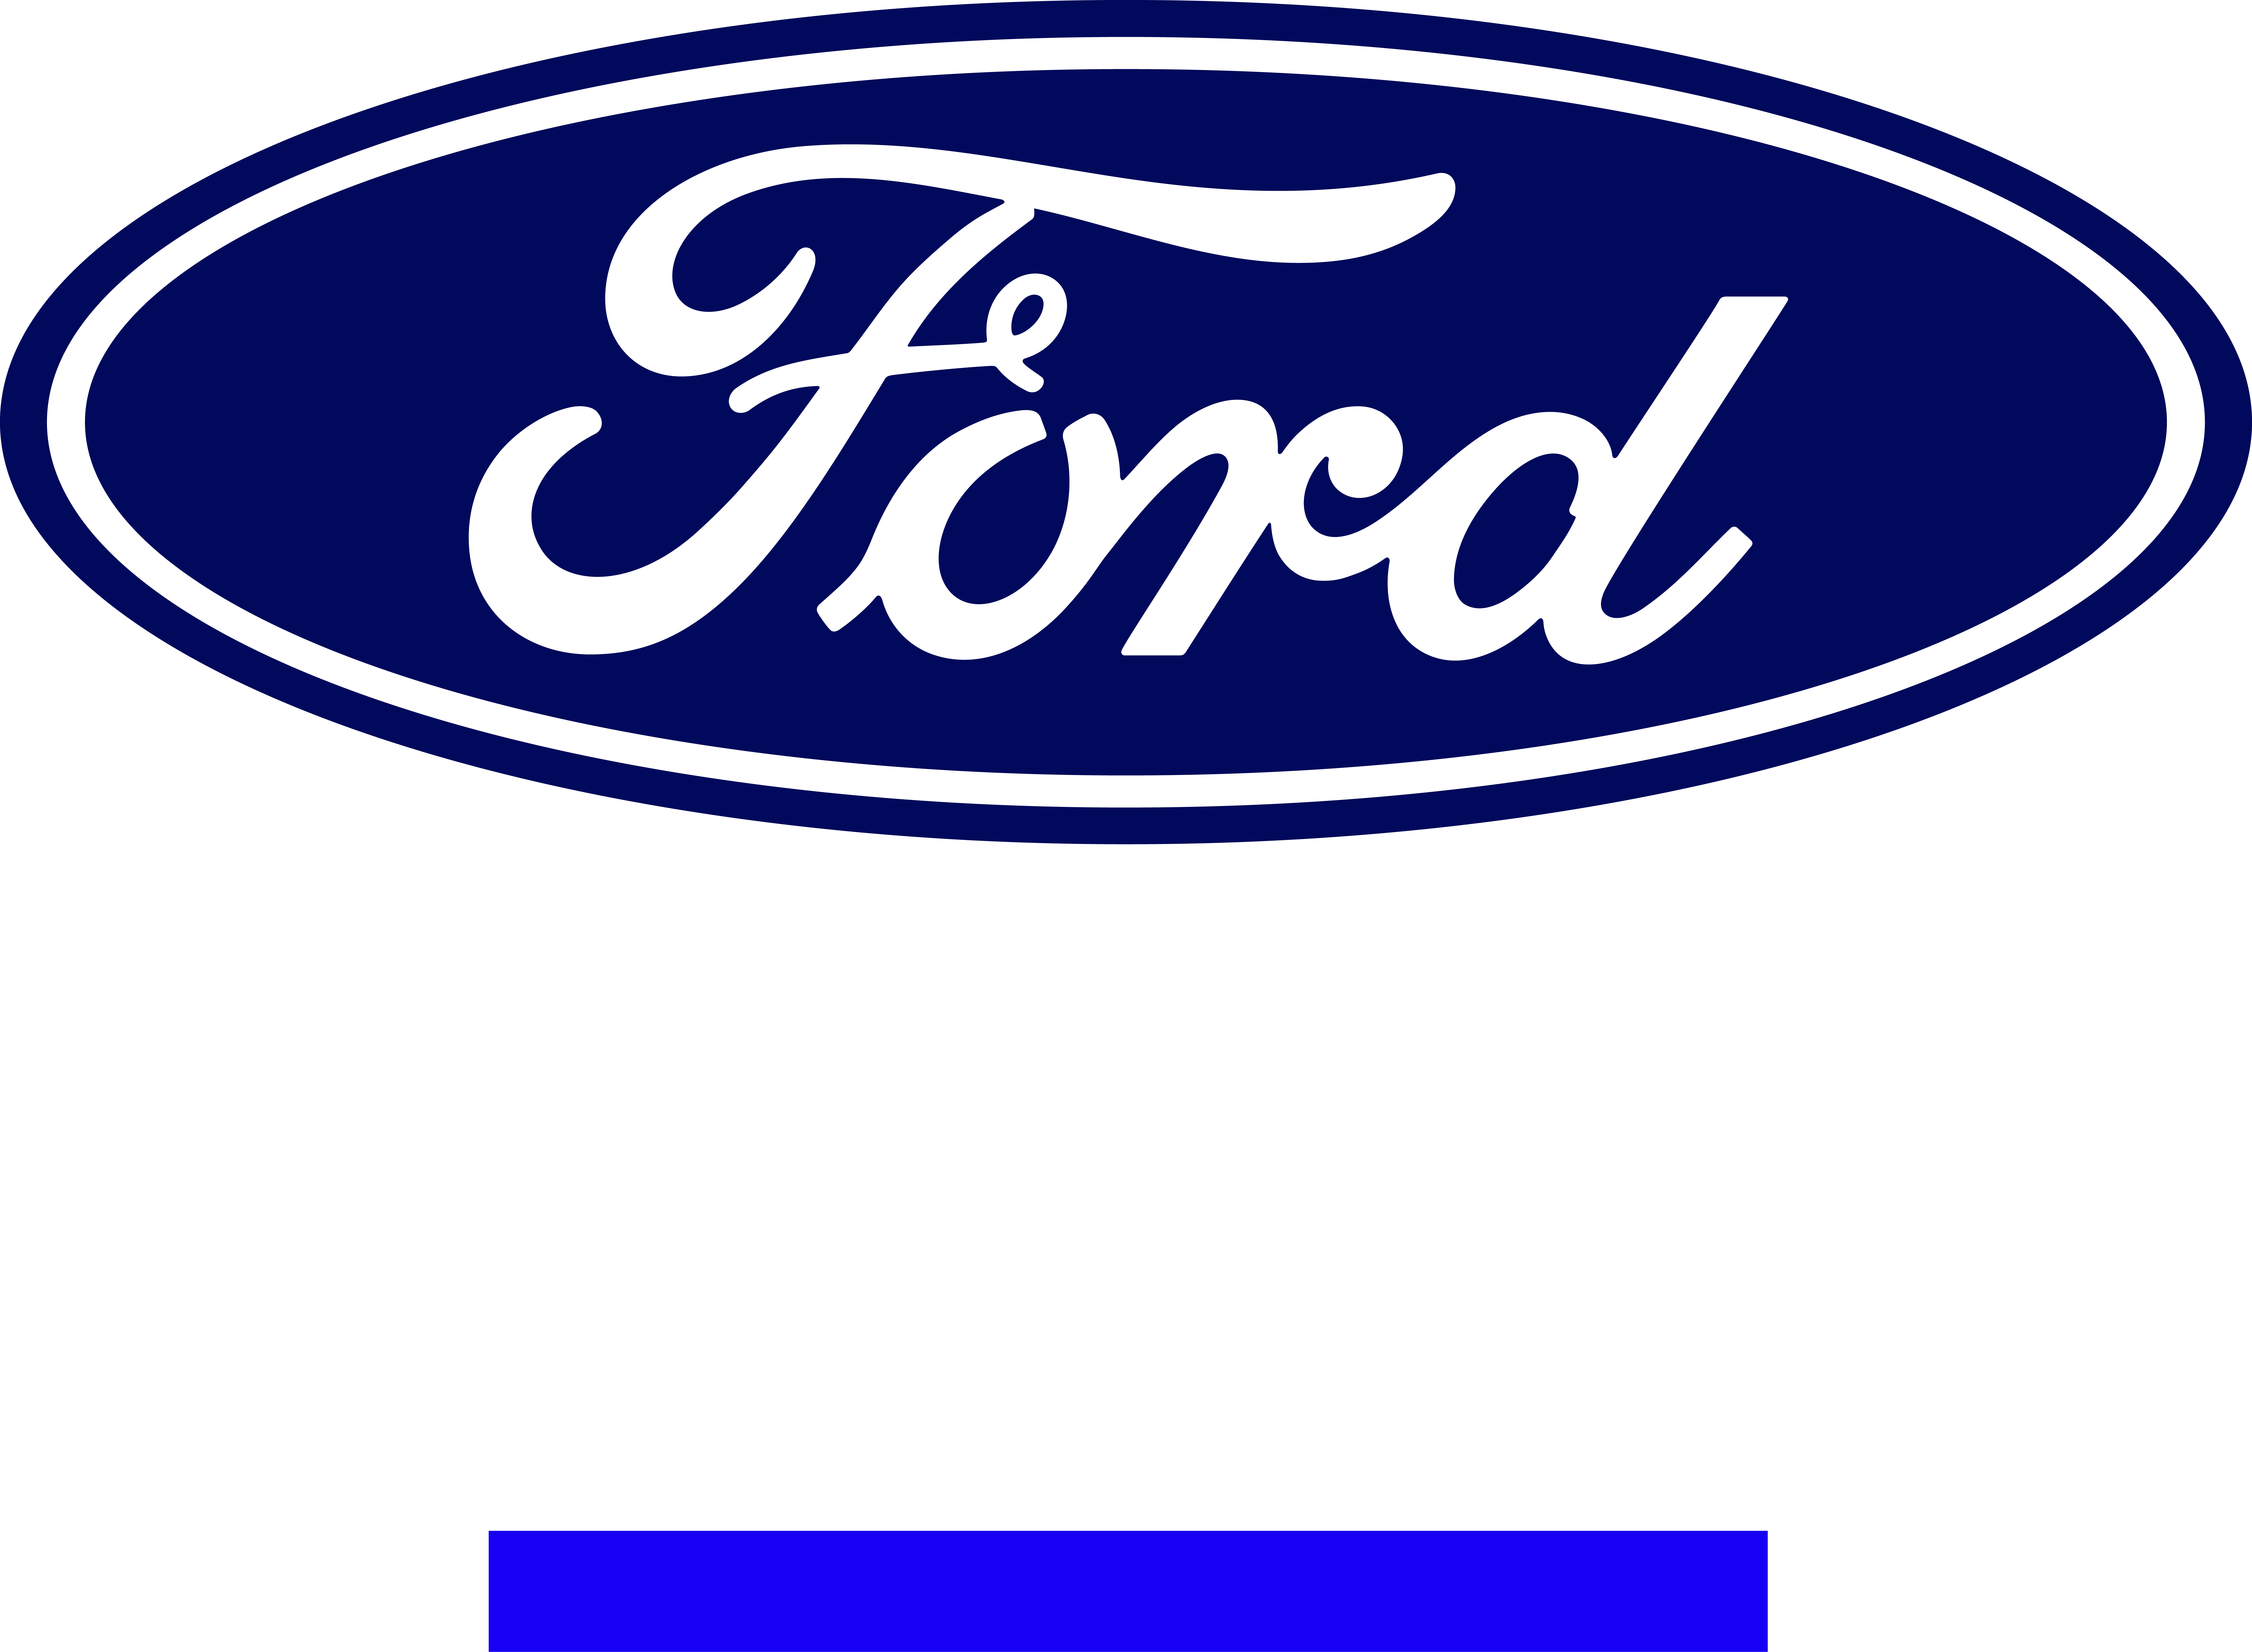 Ford Pro